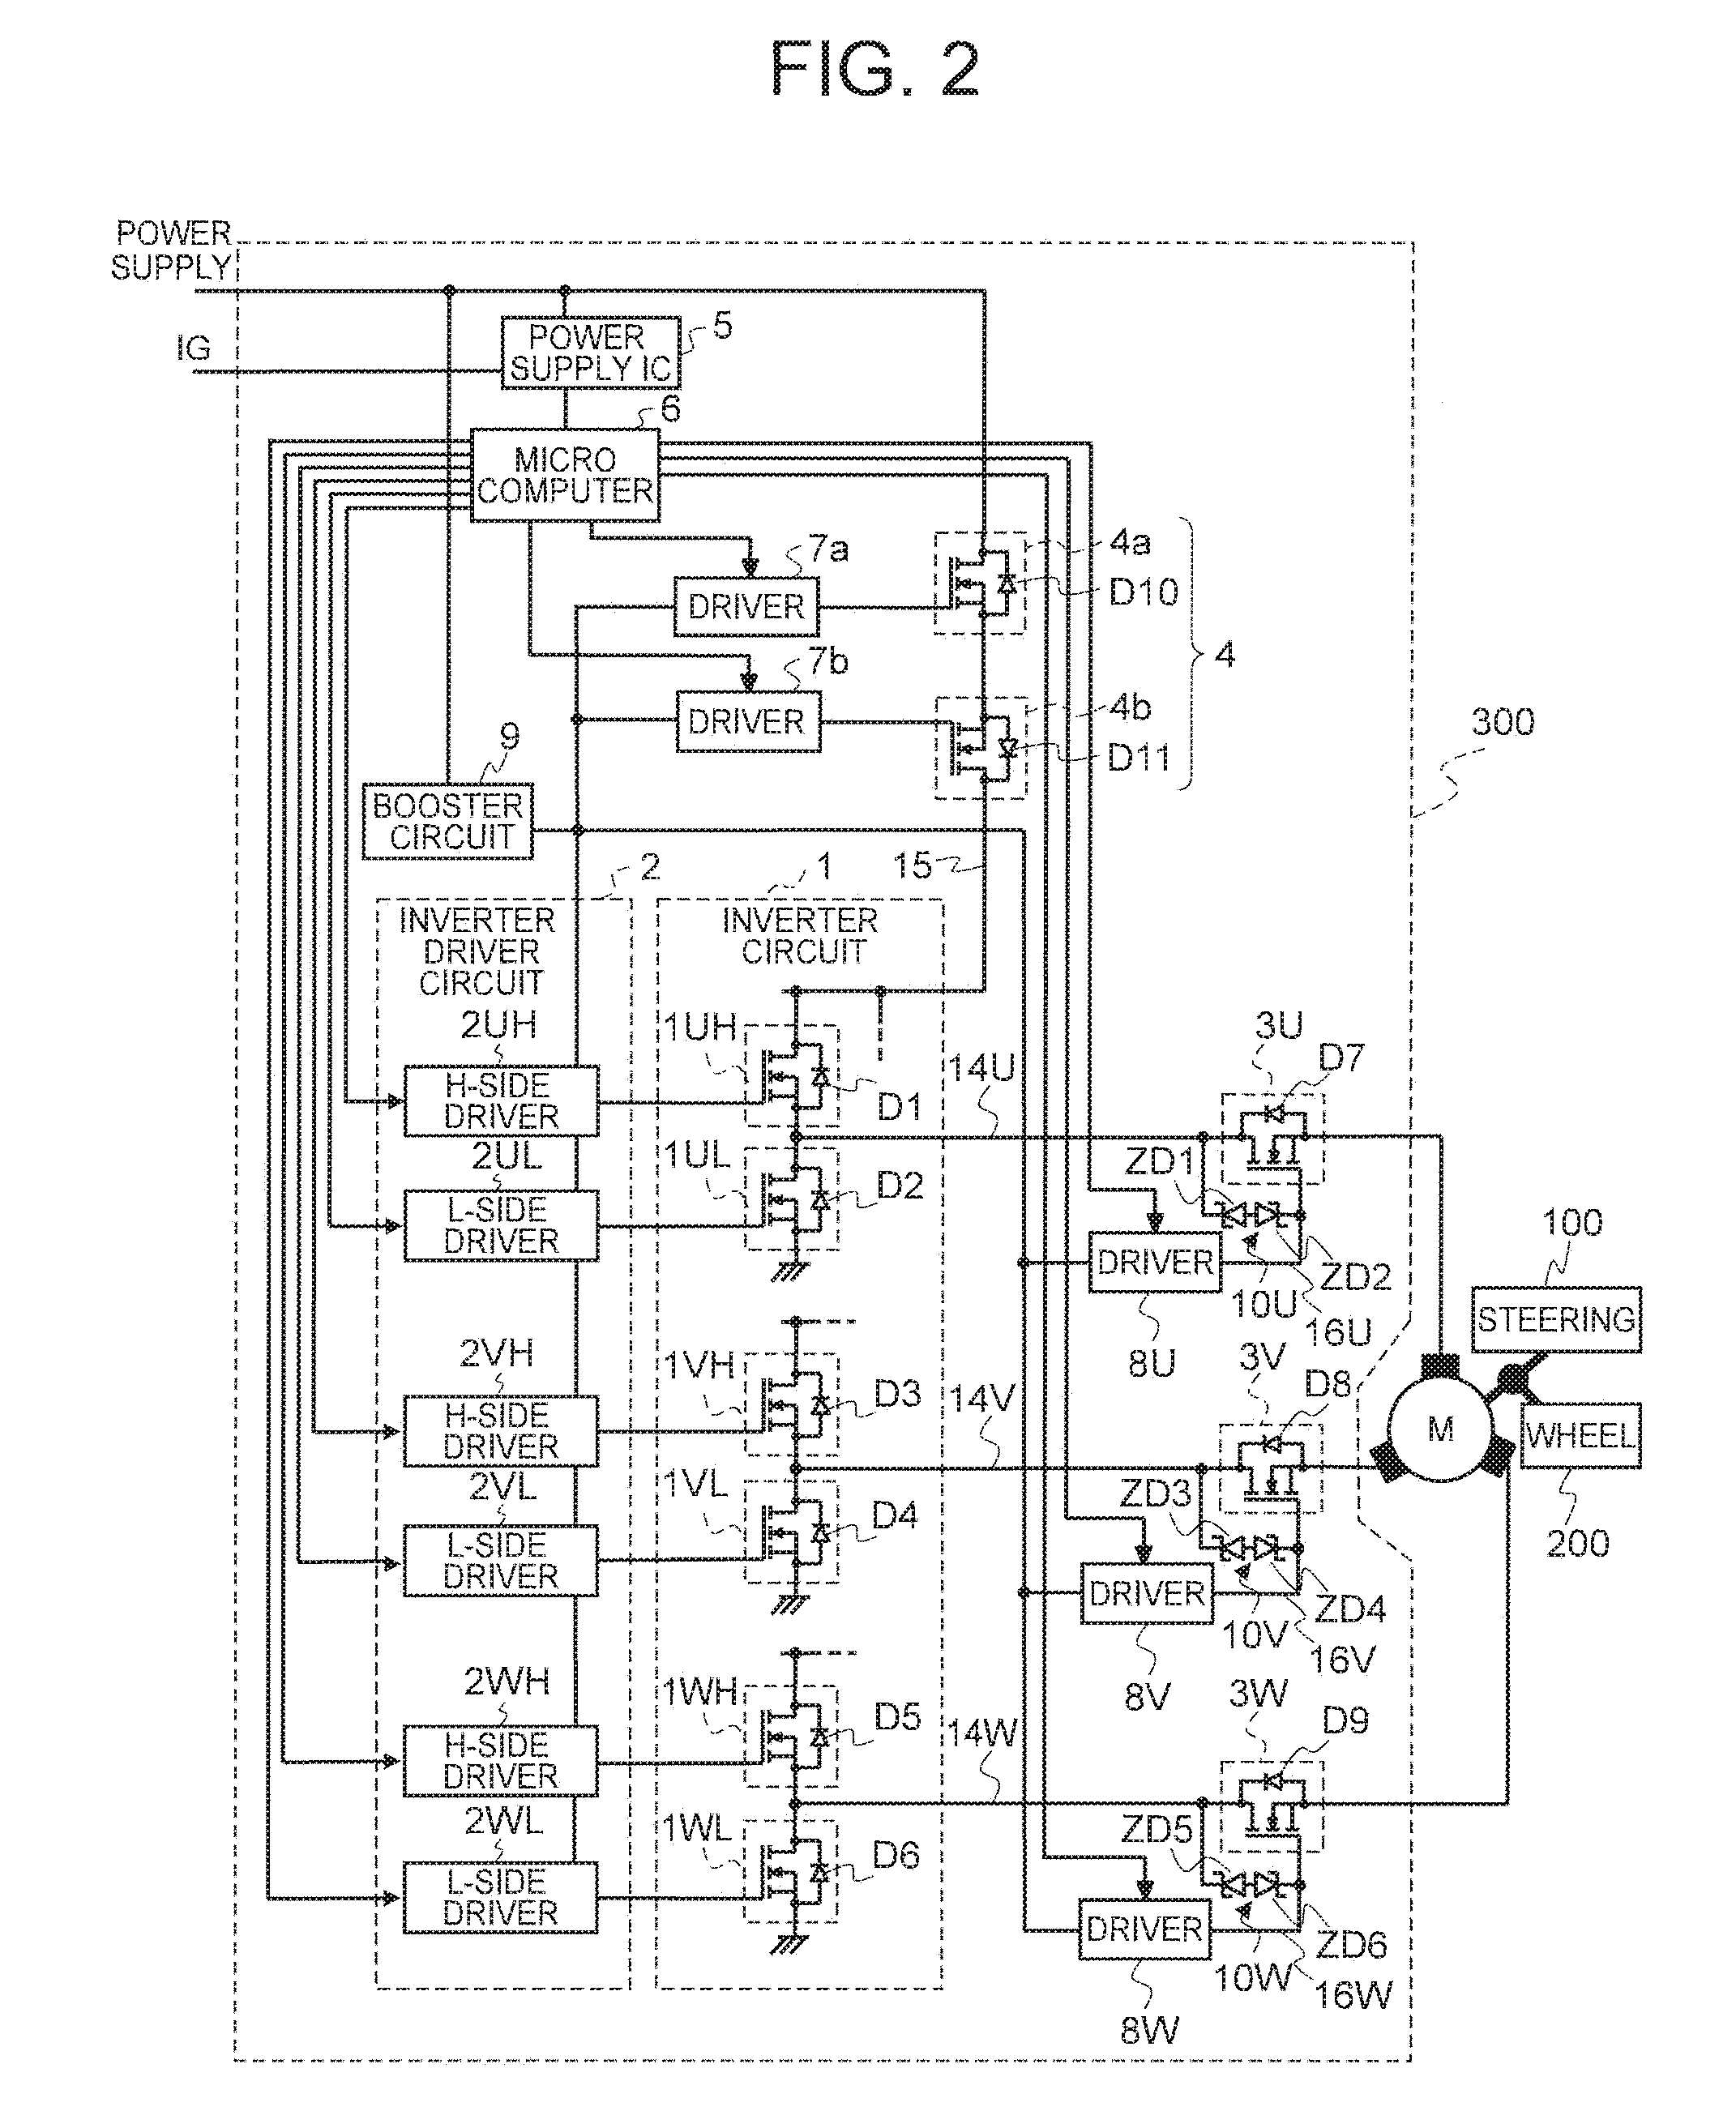 Drive control apparatus for electric motor